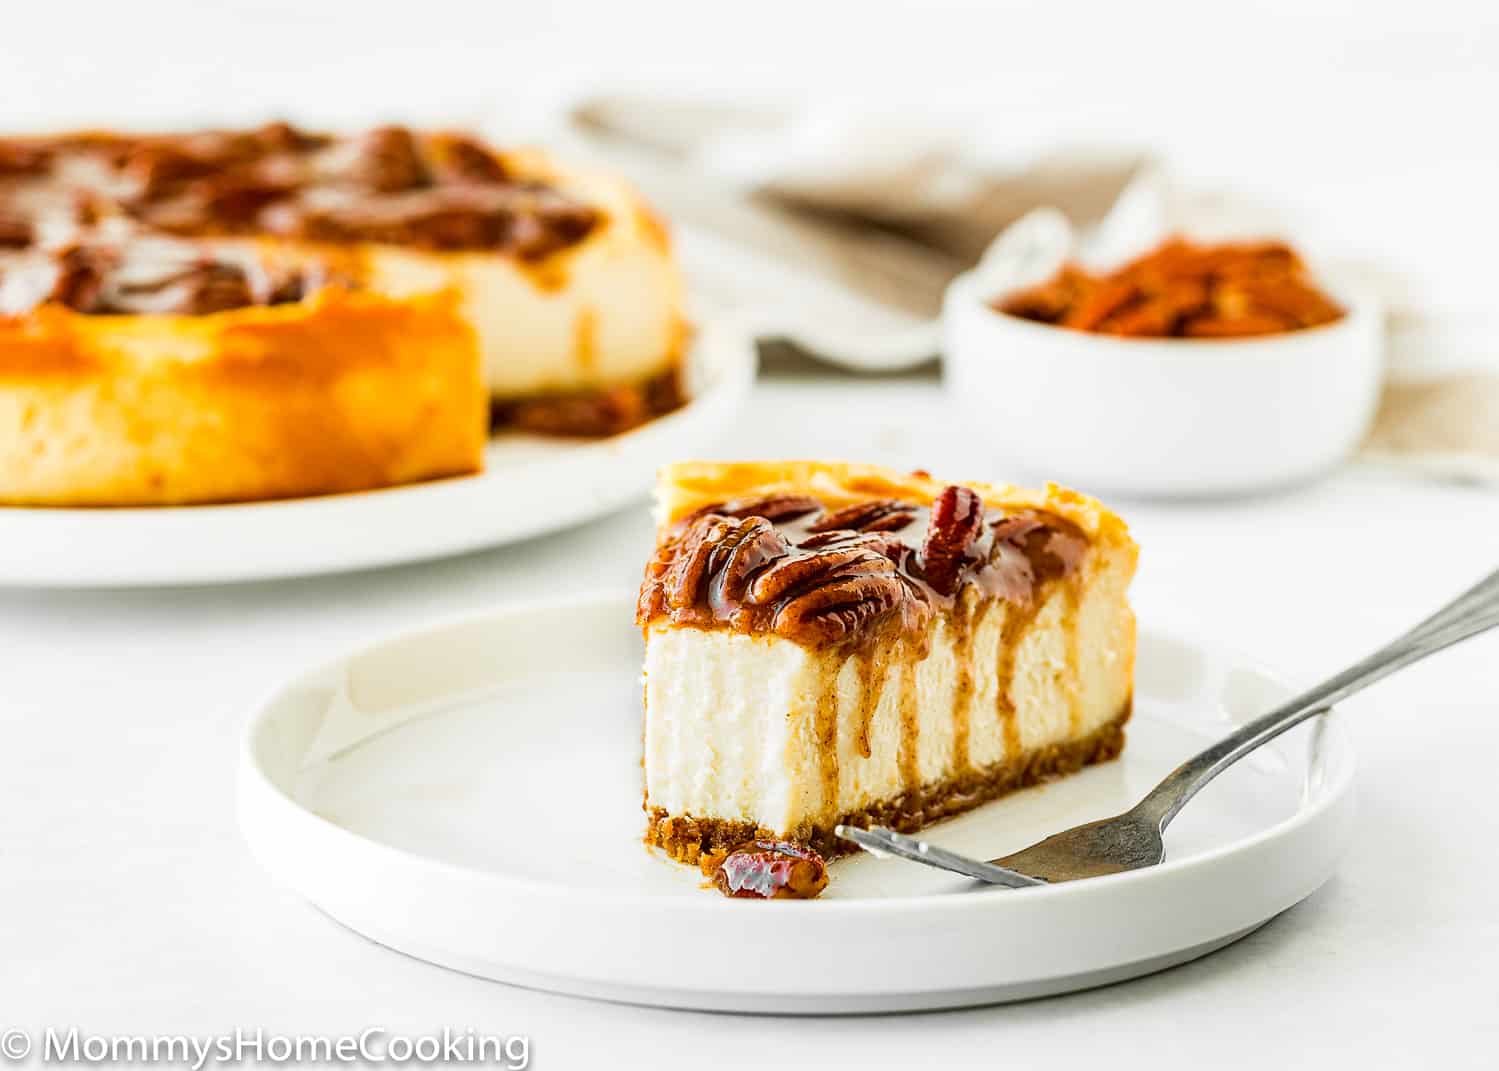 Eggless Pecan Pie Cheesecake slice in a plate showing the creamy inside texture.